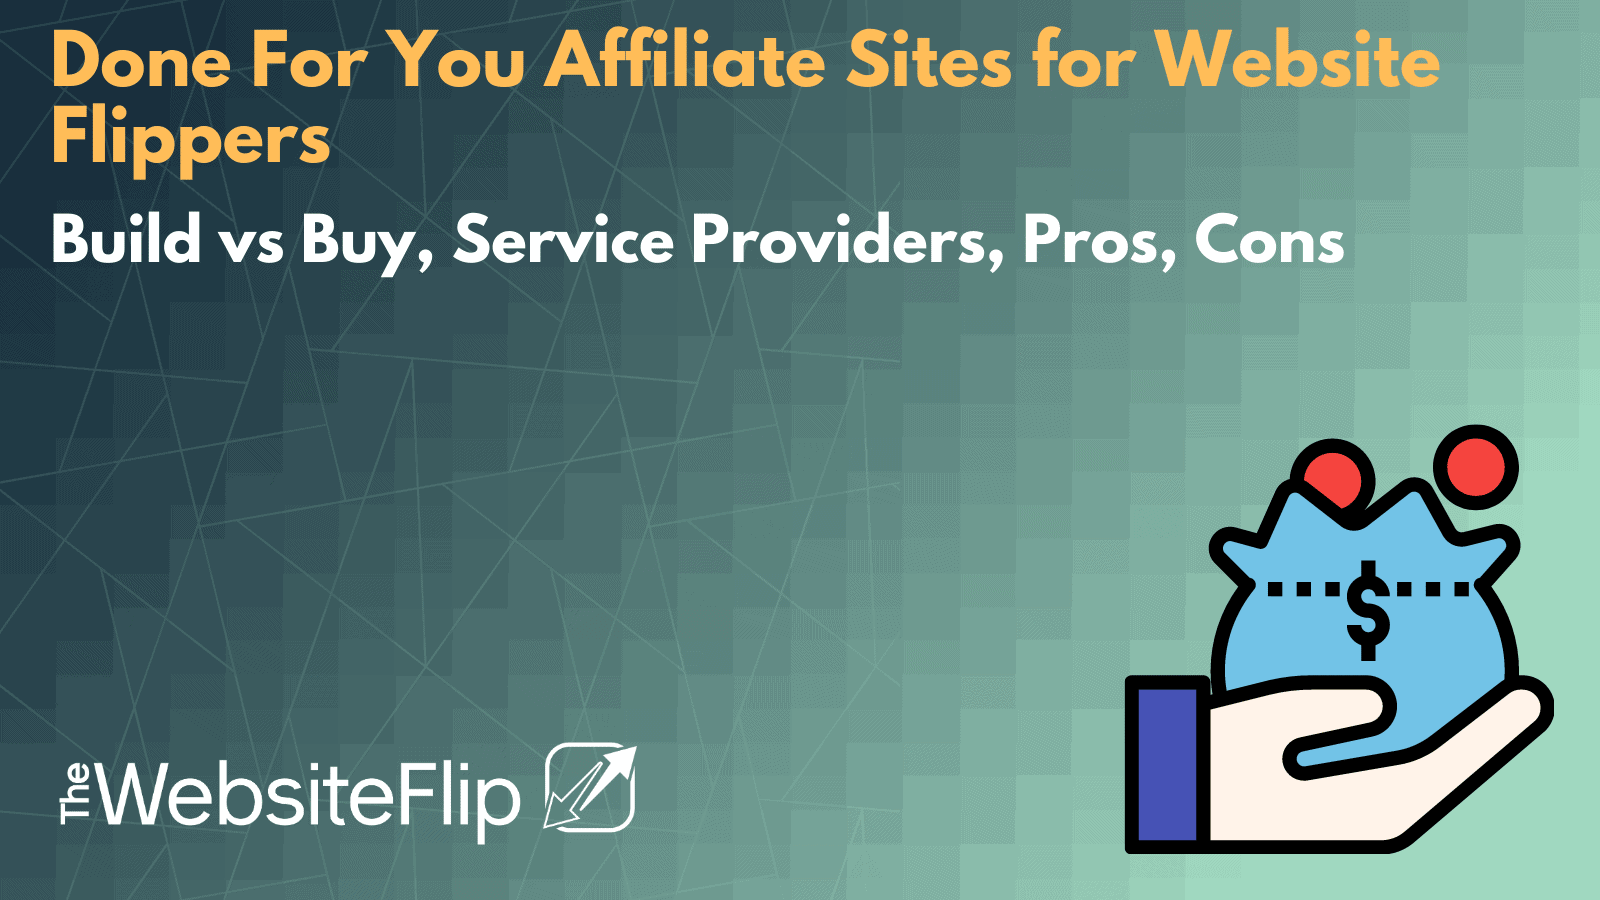 Done For You Affiliate Sites for Website Flippers